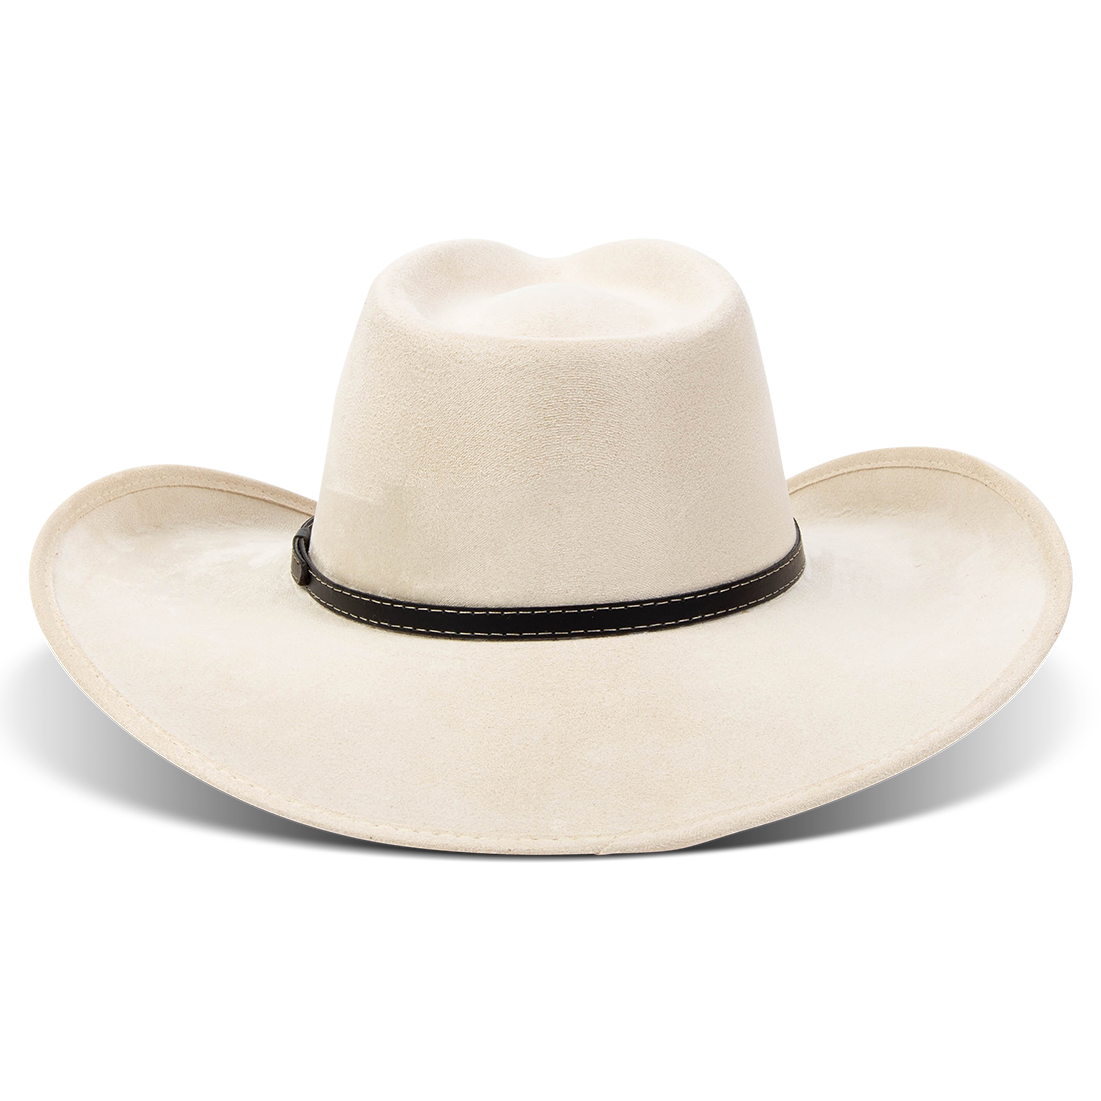 Jones beige back view showing braided leather band on FREEBIRD western cowboy hat featuring teardrop crown and upturned-brim